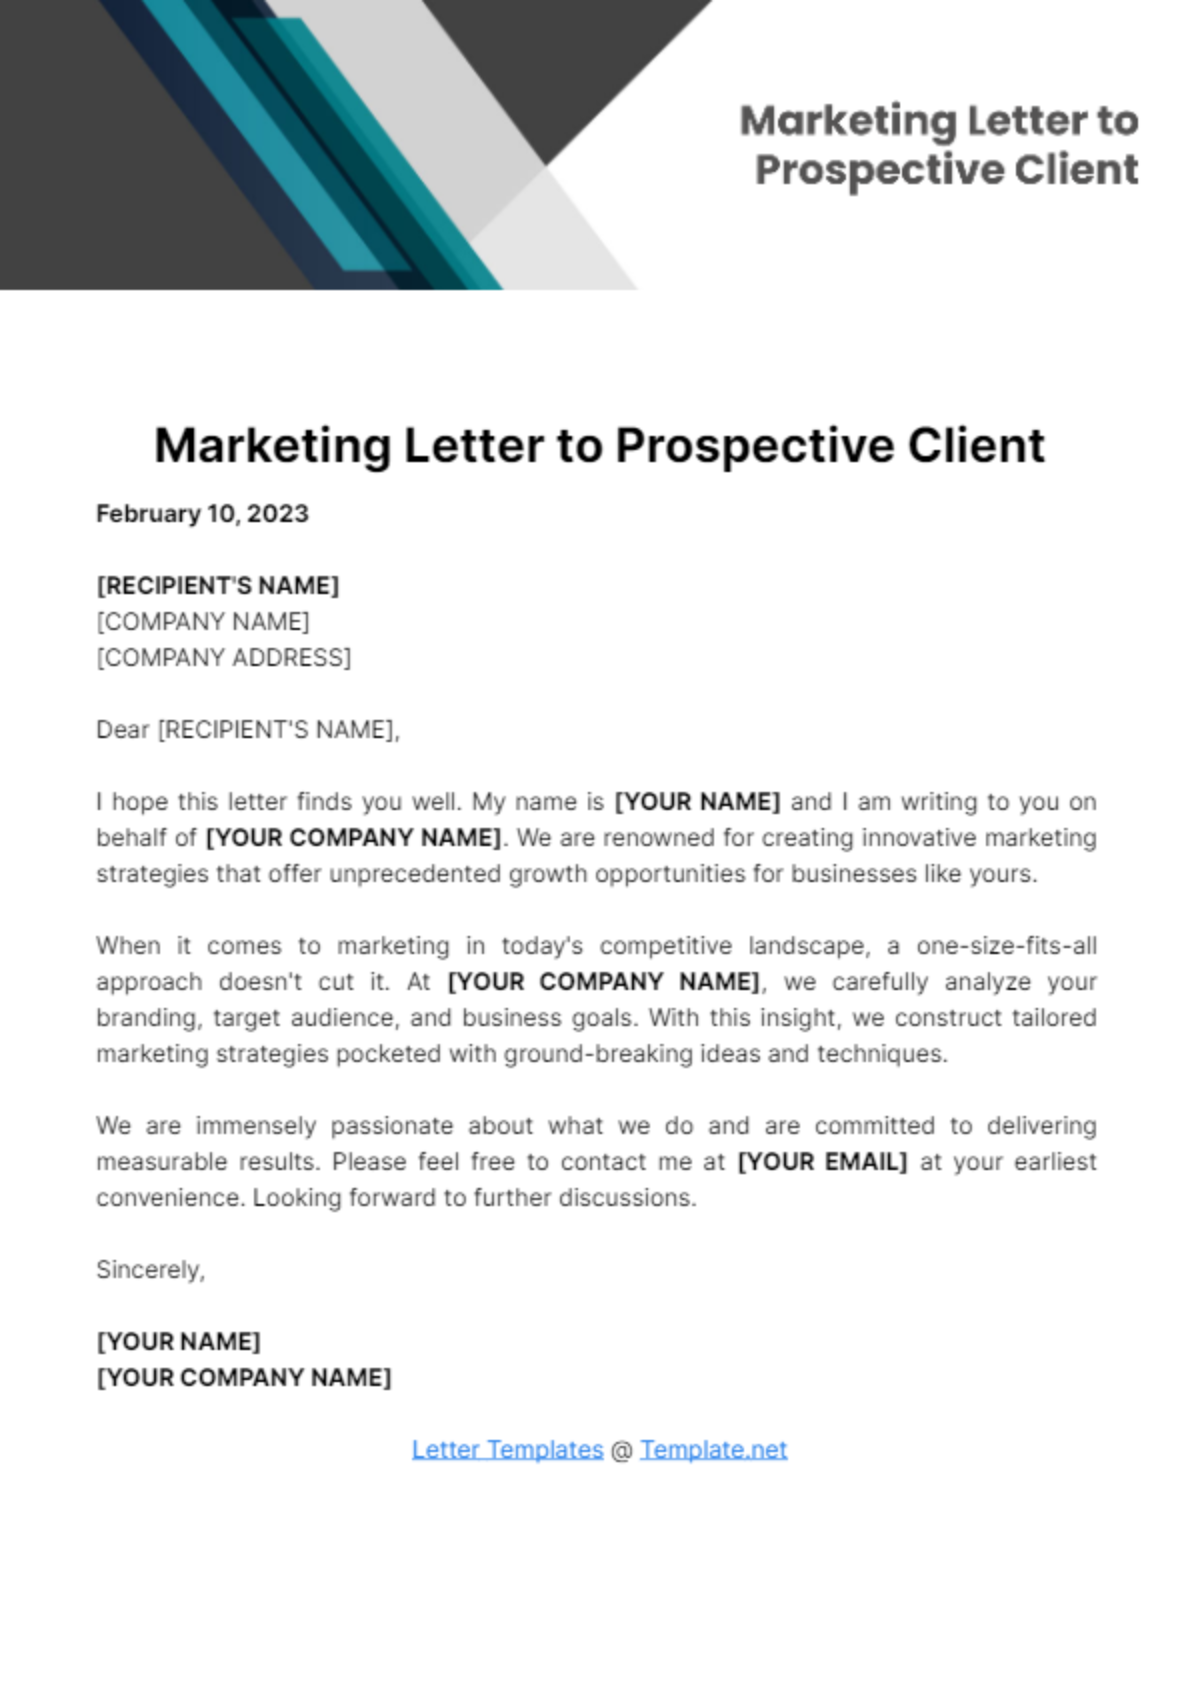 Free Marketing Letter to Prospective Client Template